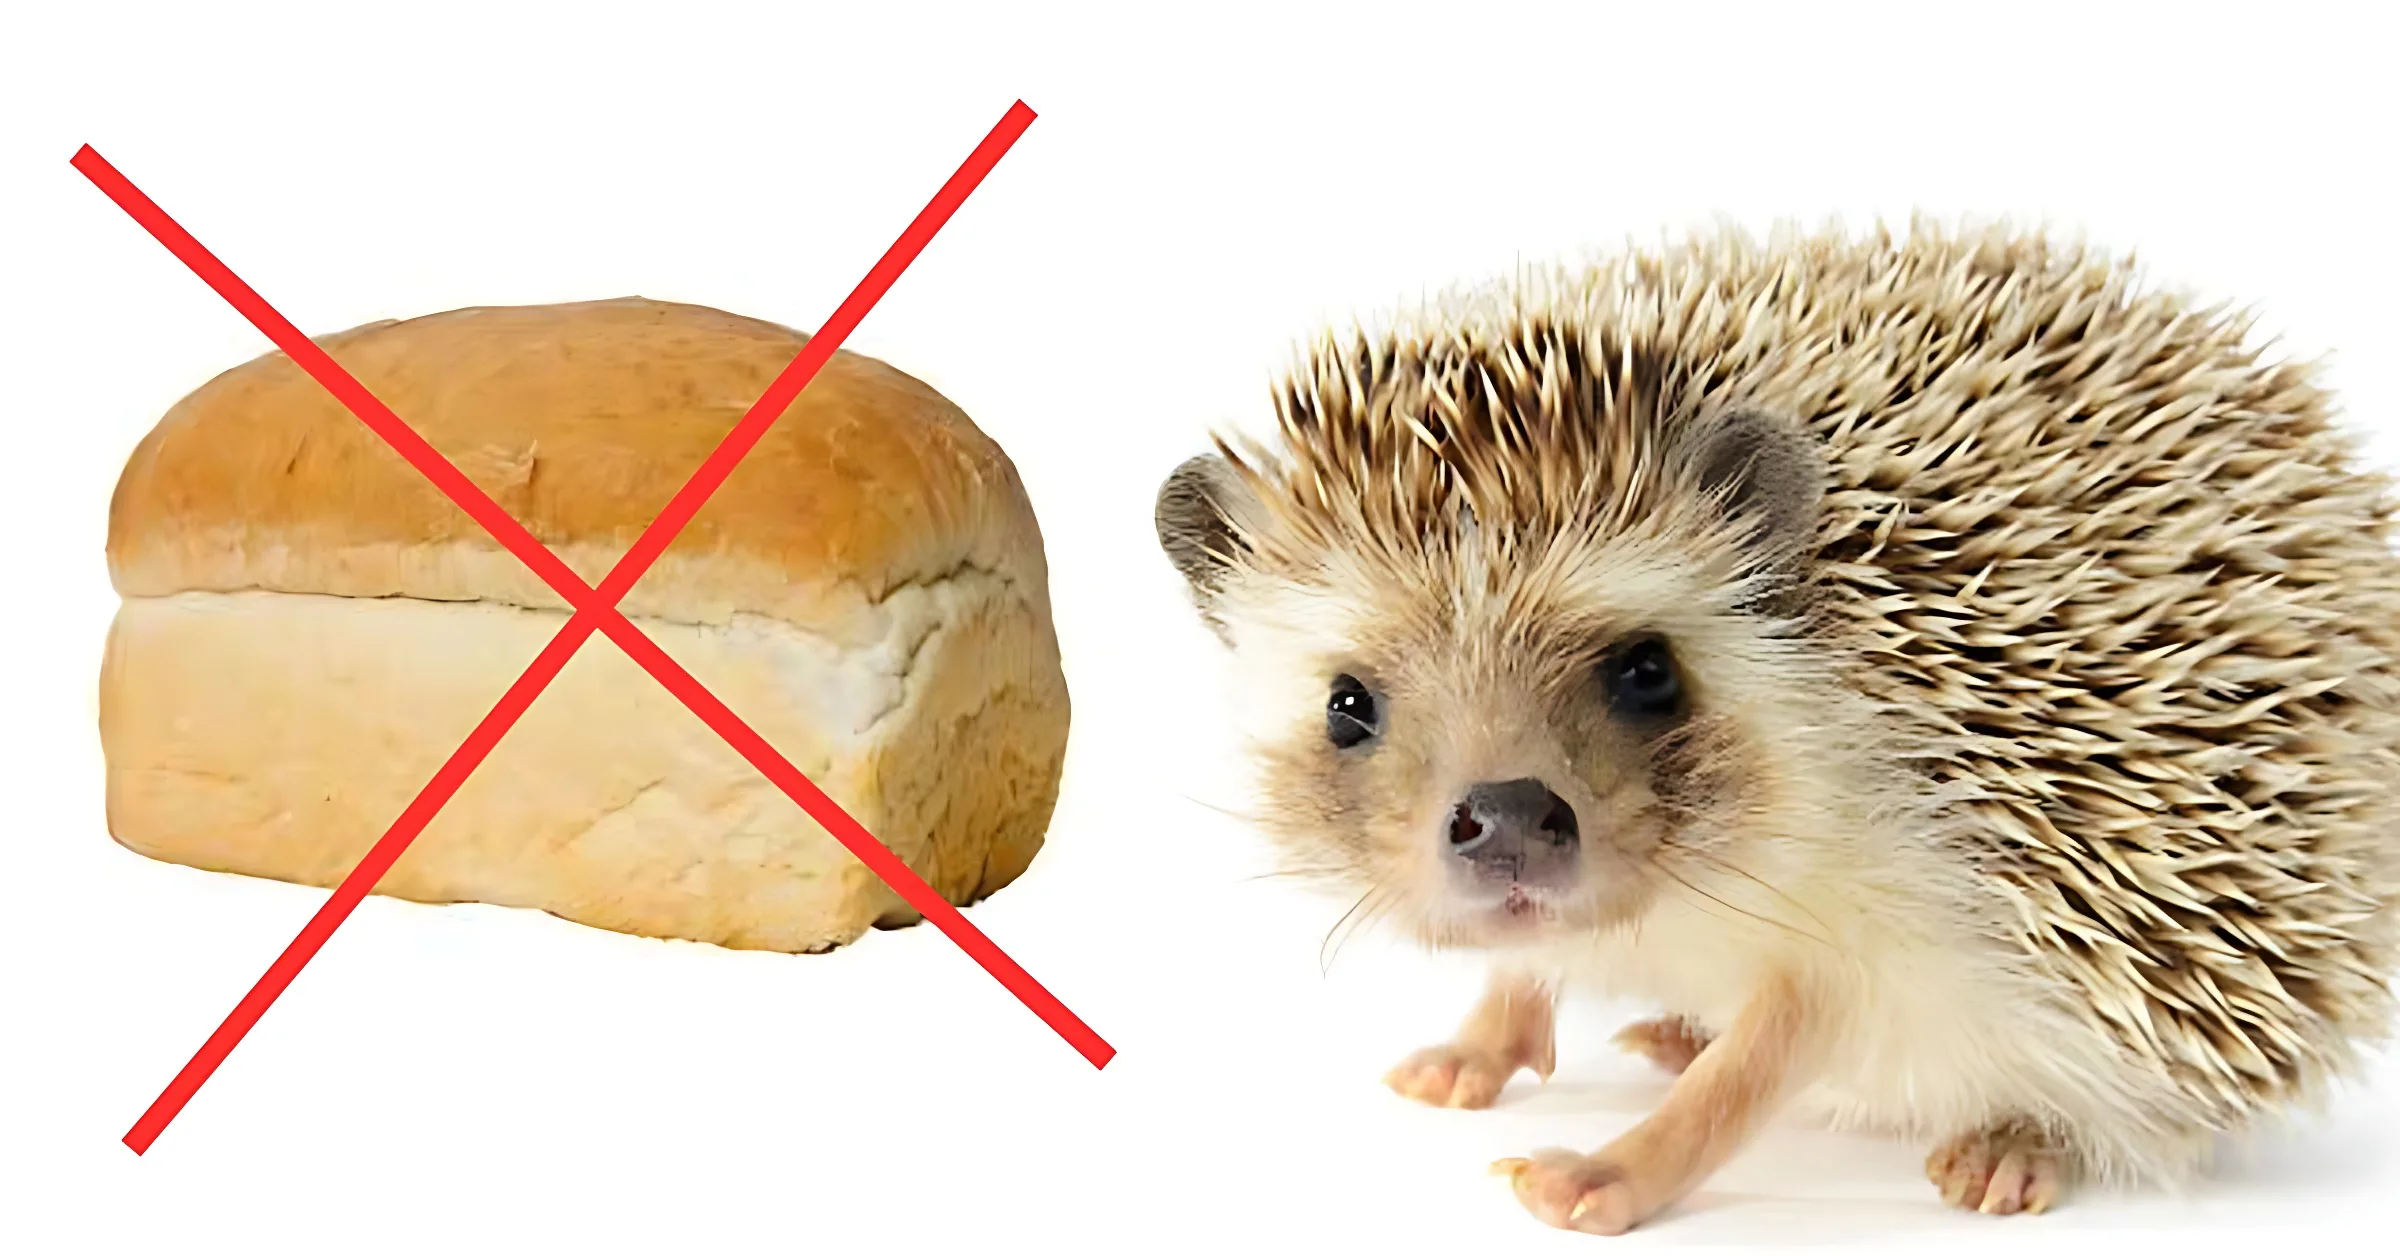 What Can’t Hedgehogs Eat